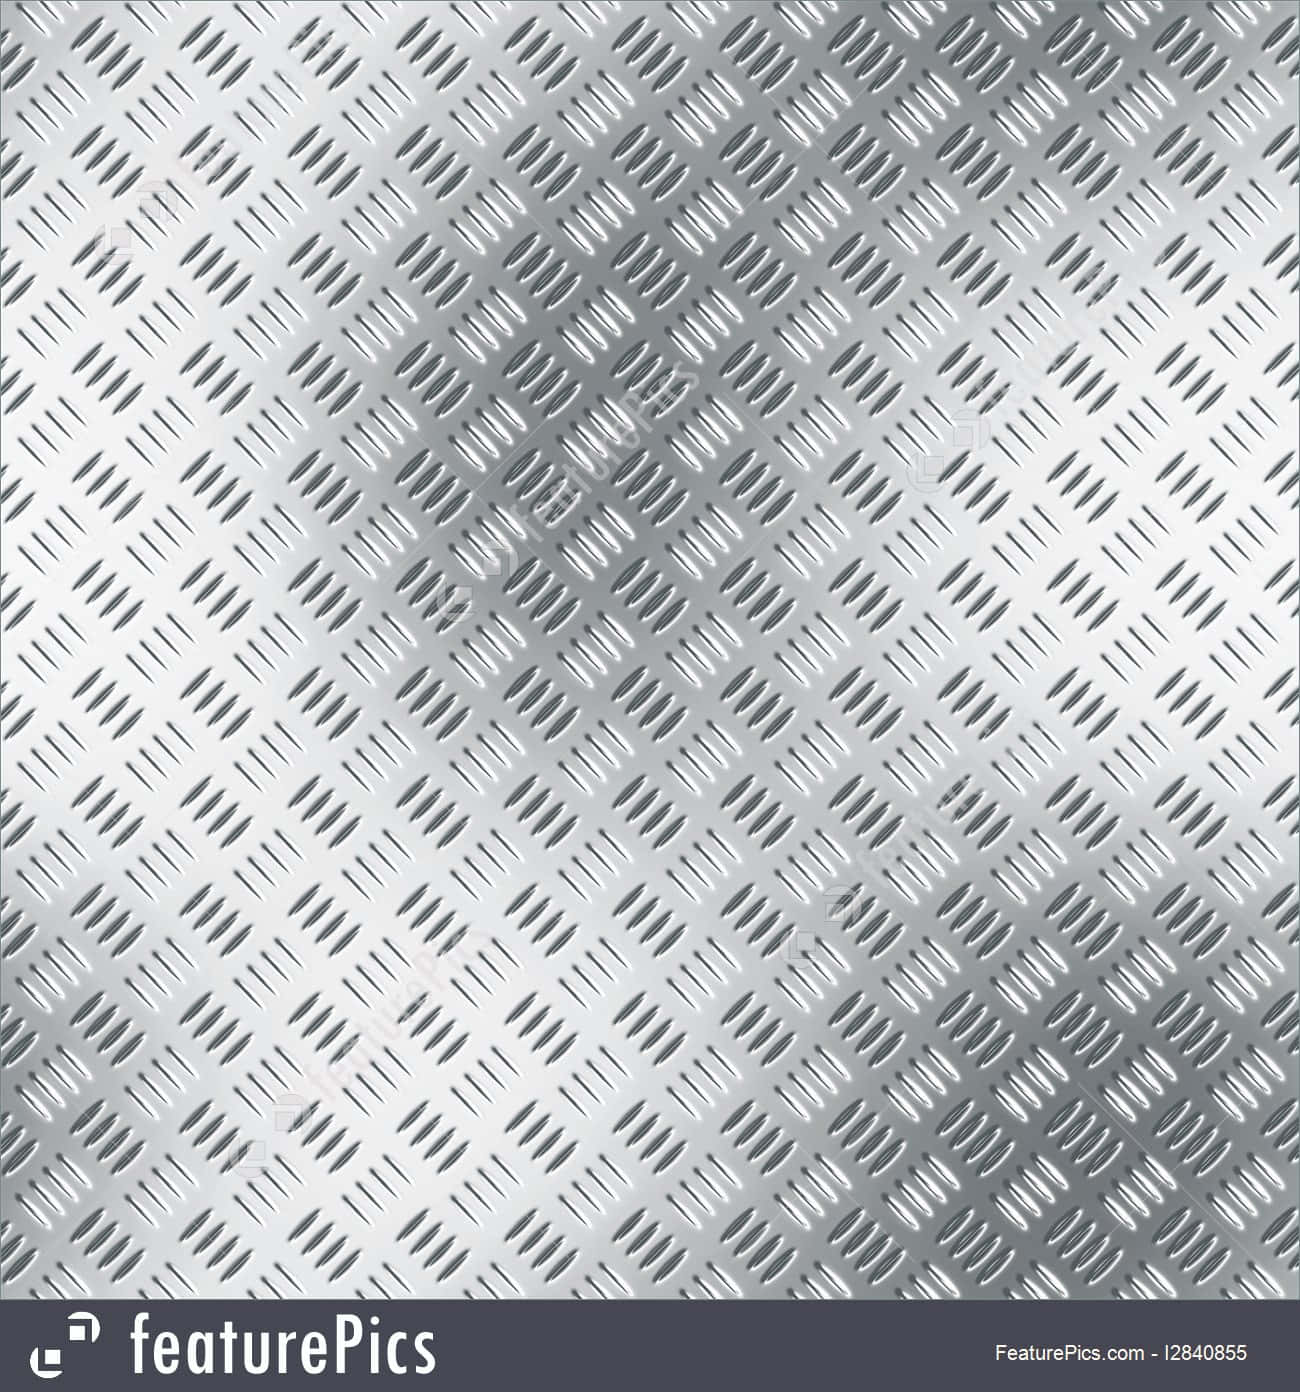 A Metal Plate Background With White And Gray Stripes Wallpaper